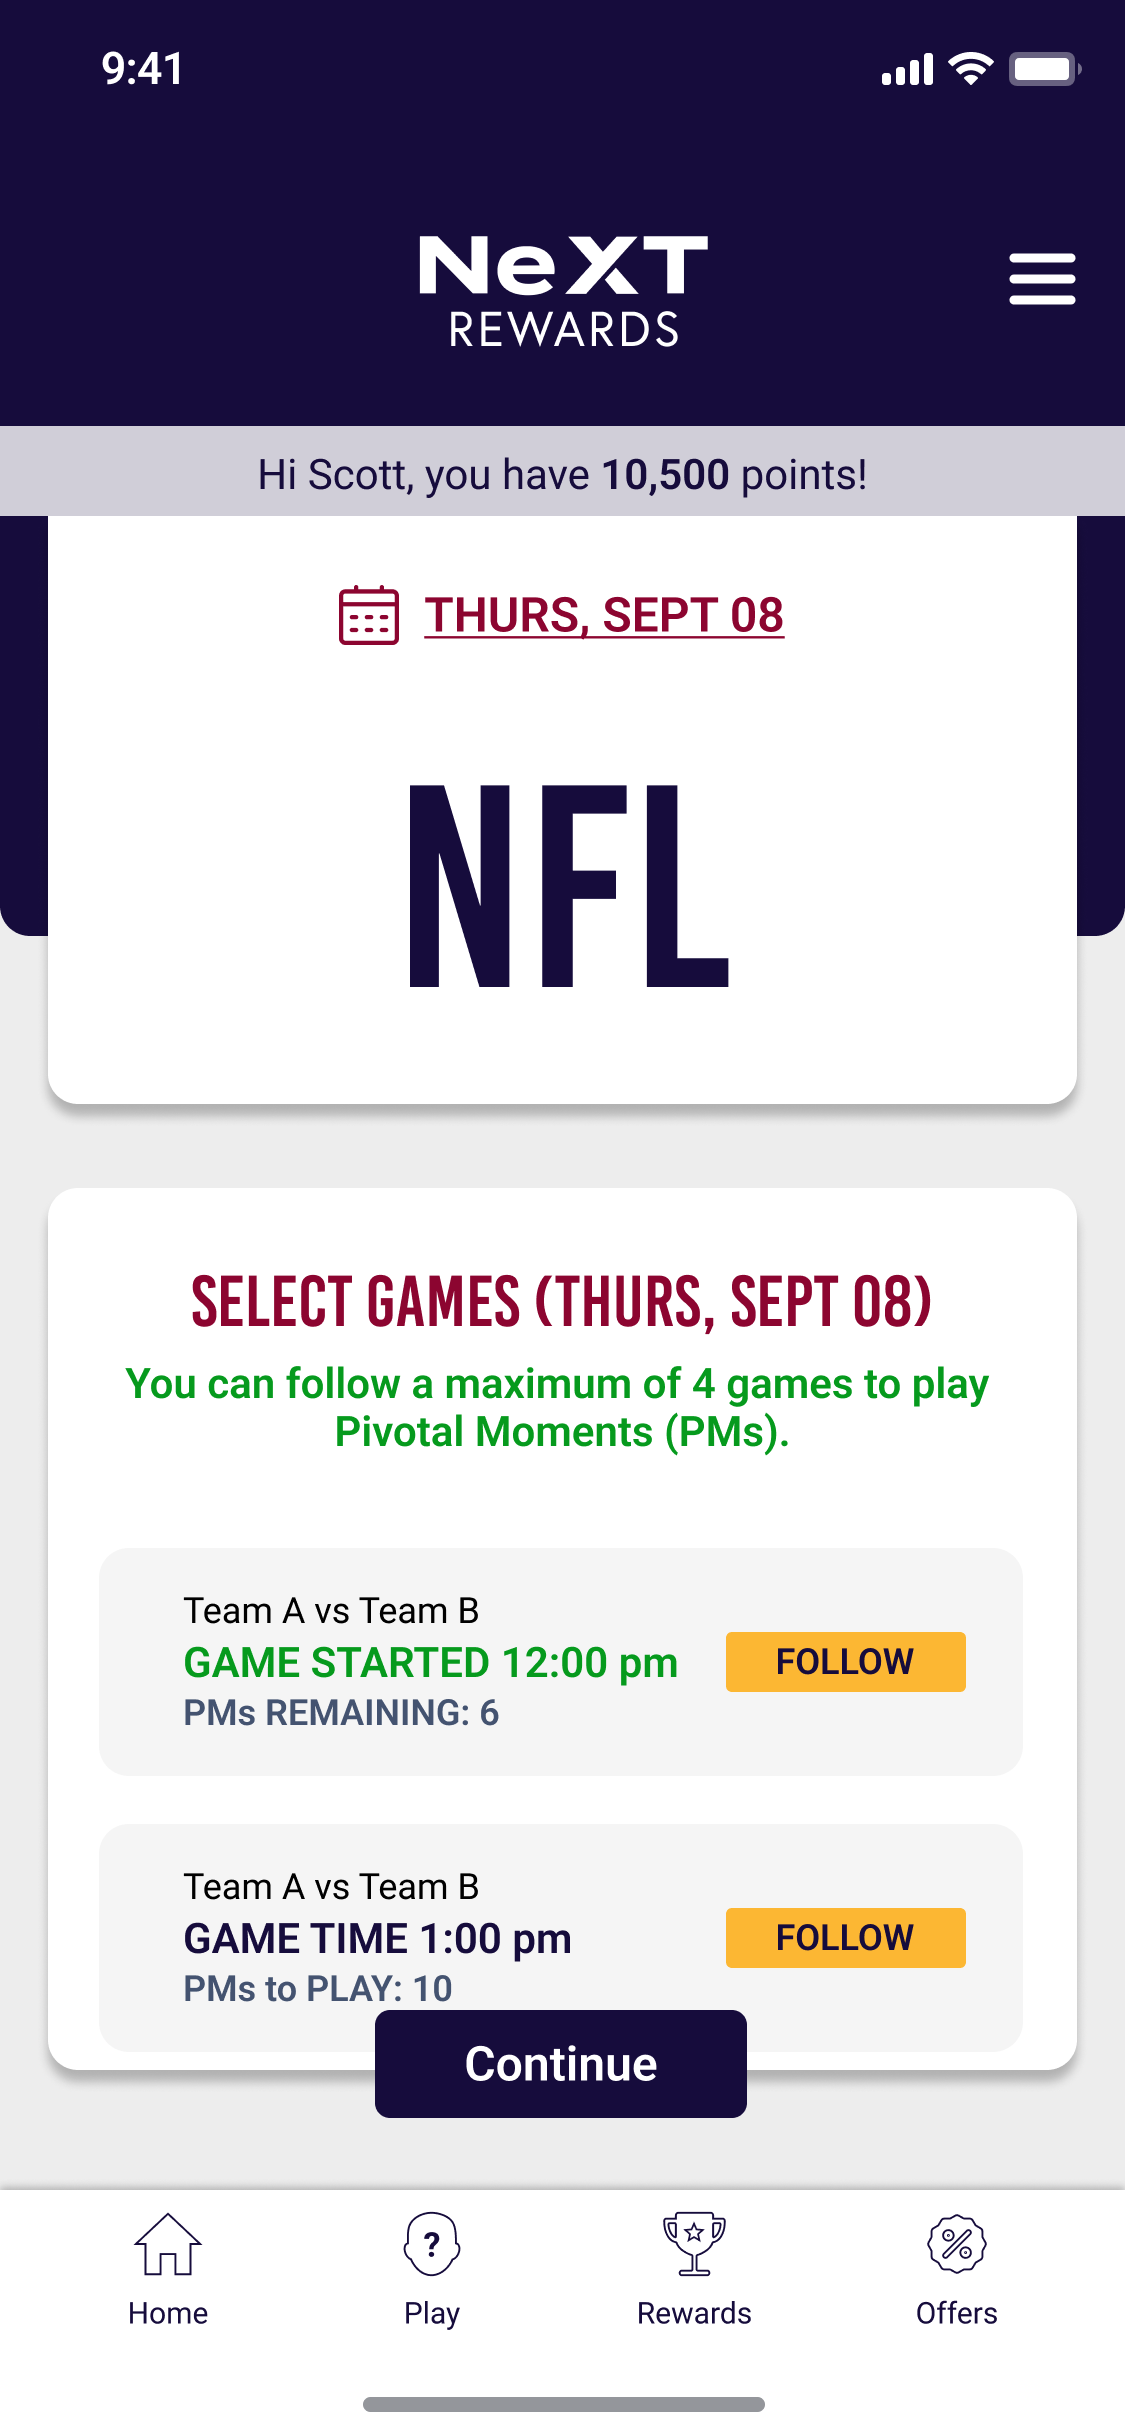 Select Games to Follow